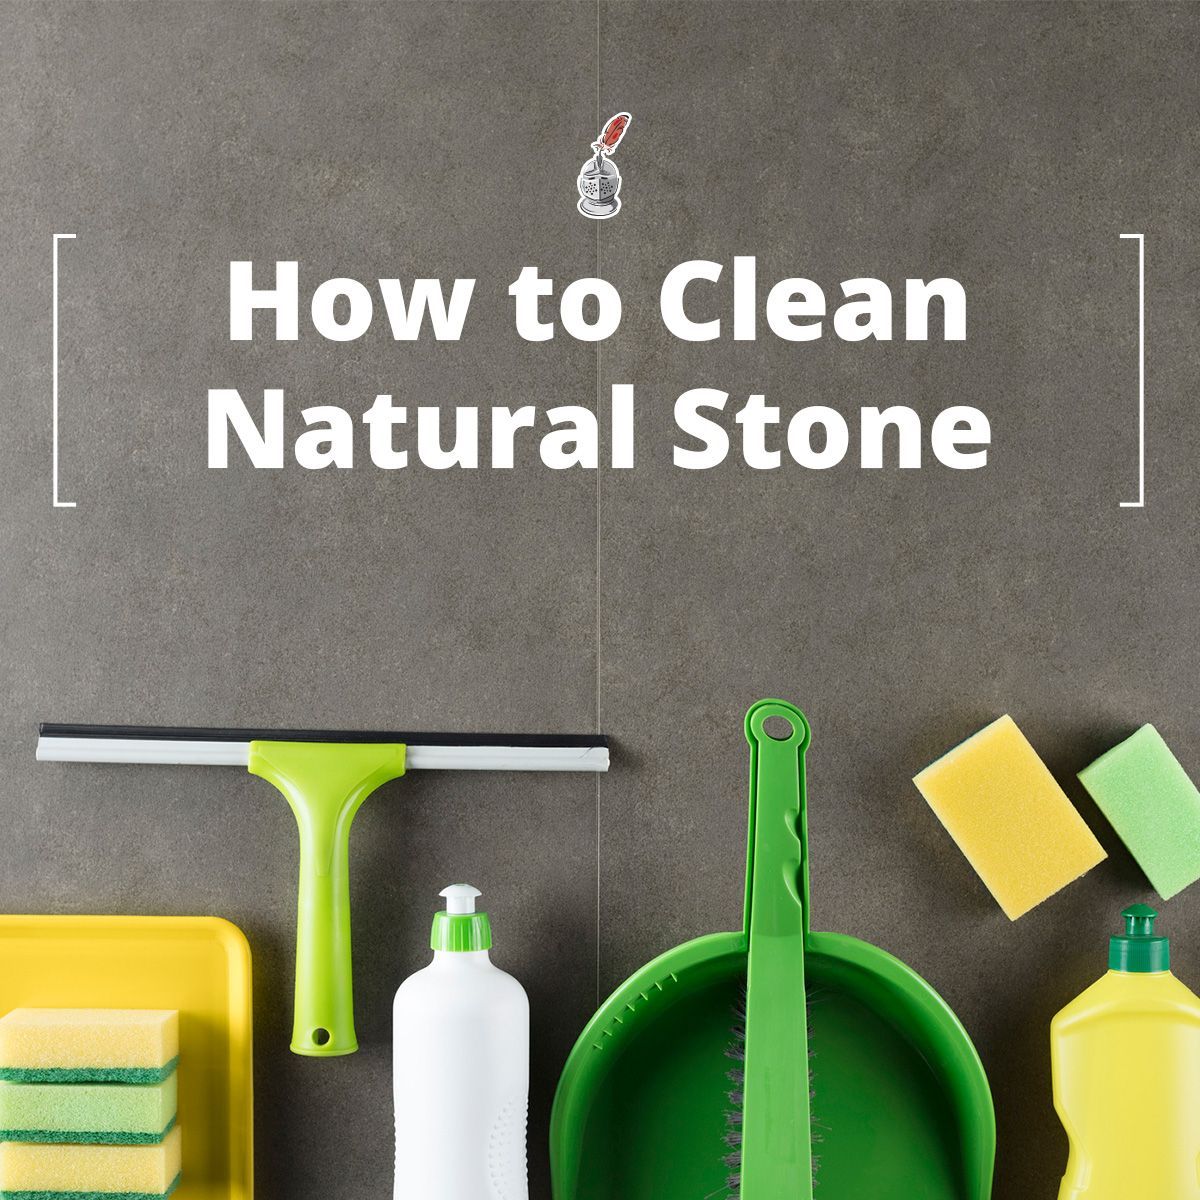 How to Clean Natural Stone